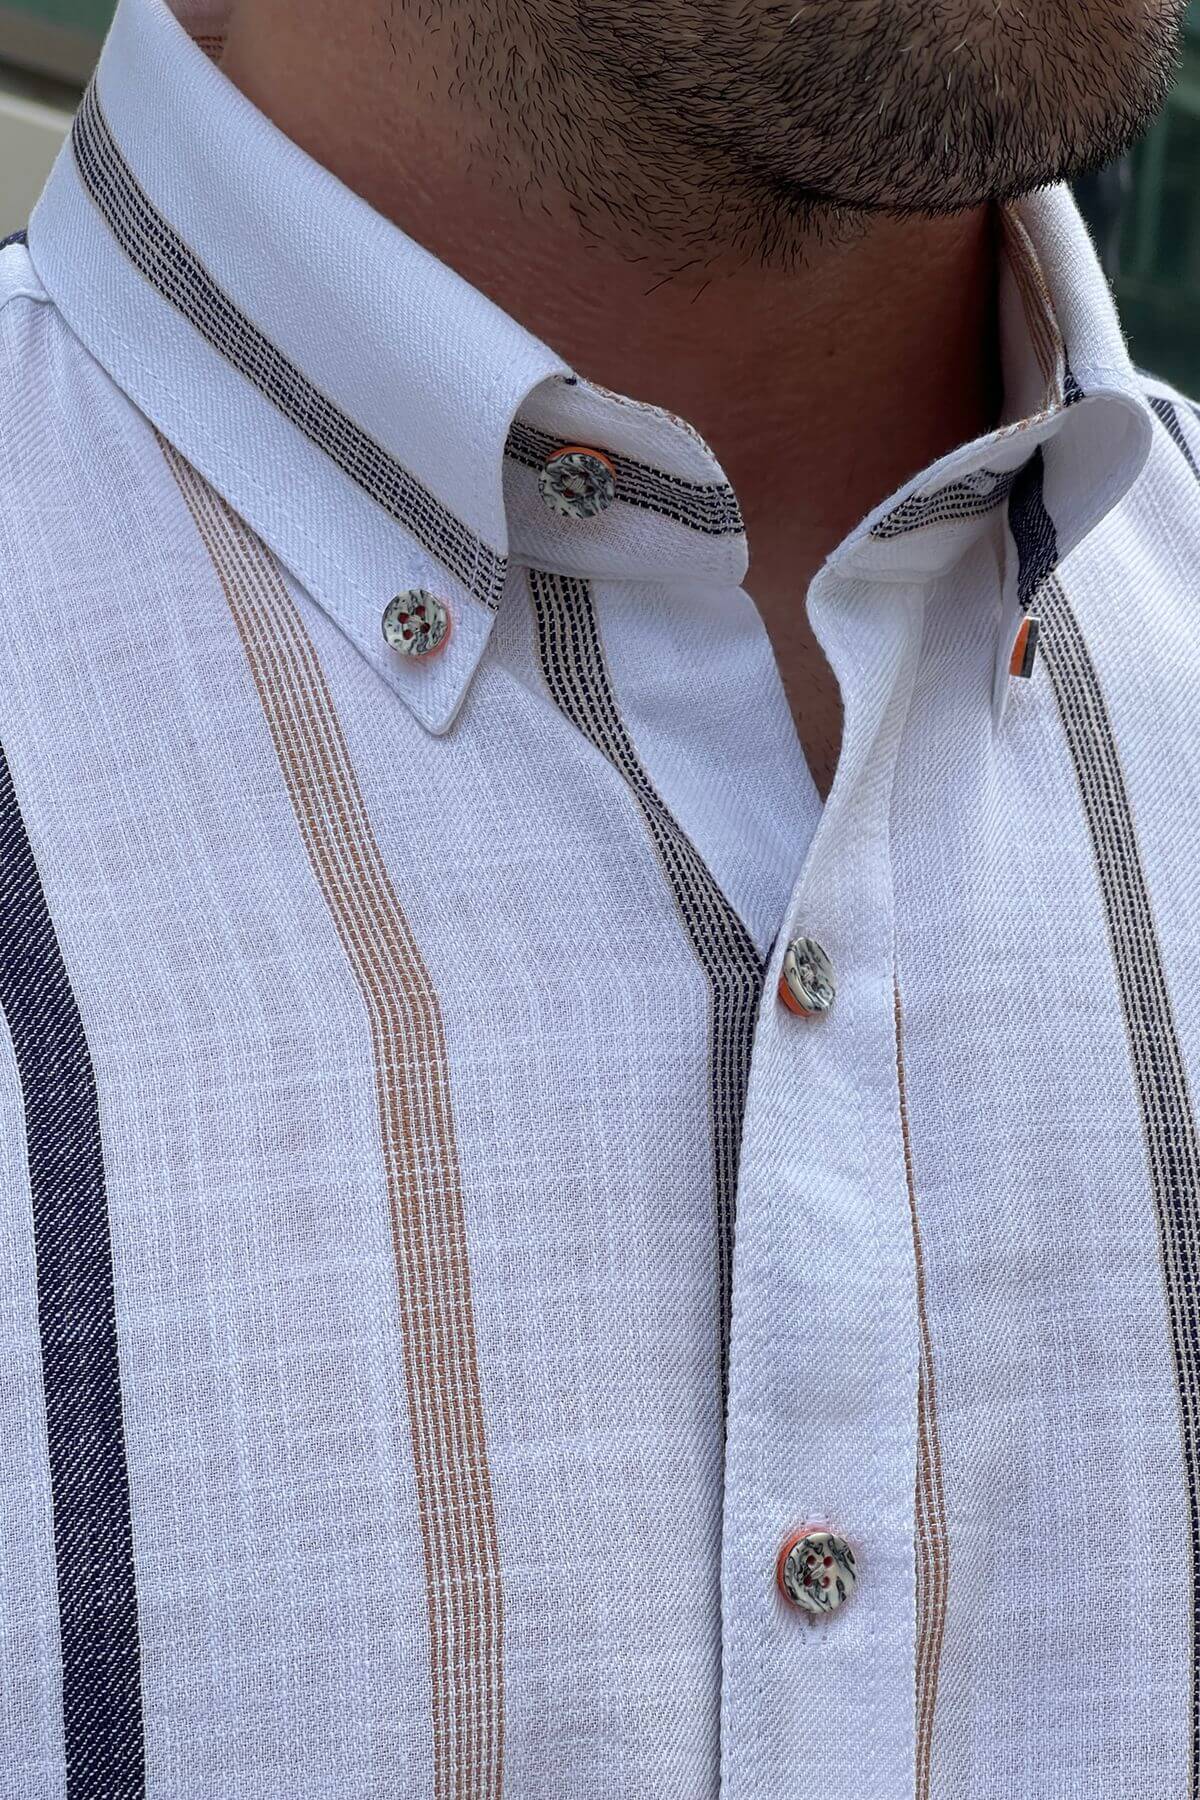 A White and Navy Blue Cotton Shirt on display